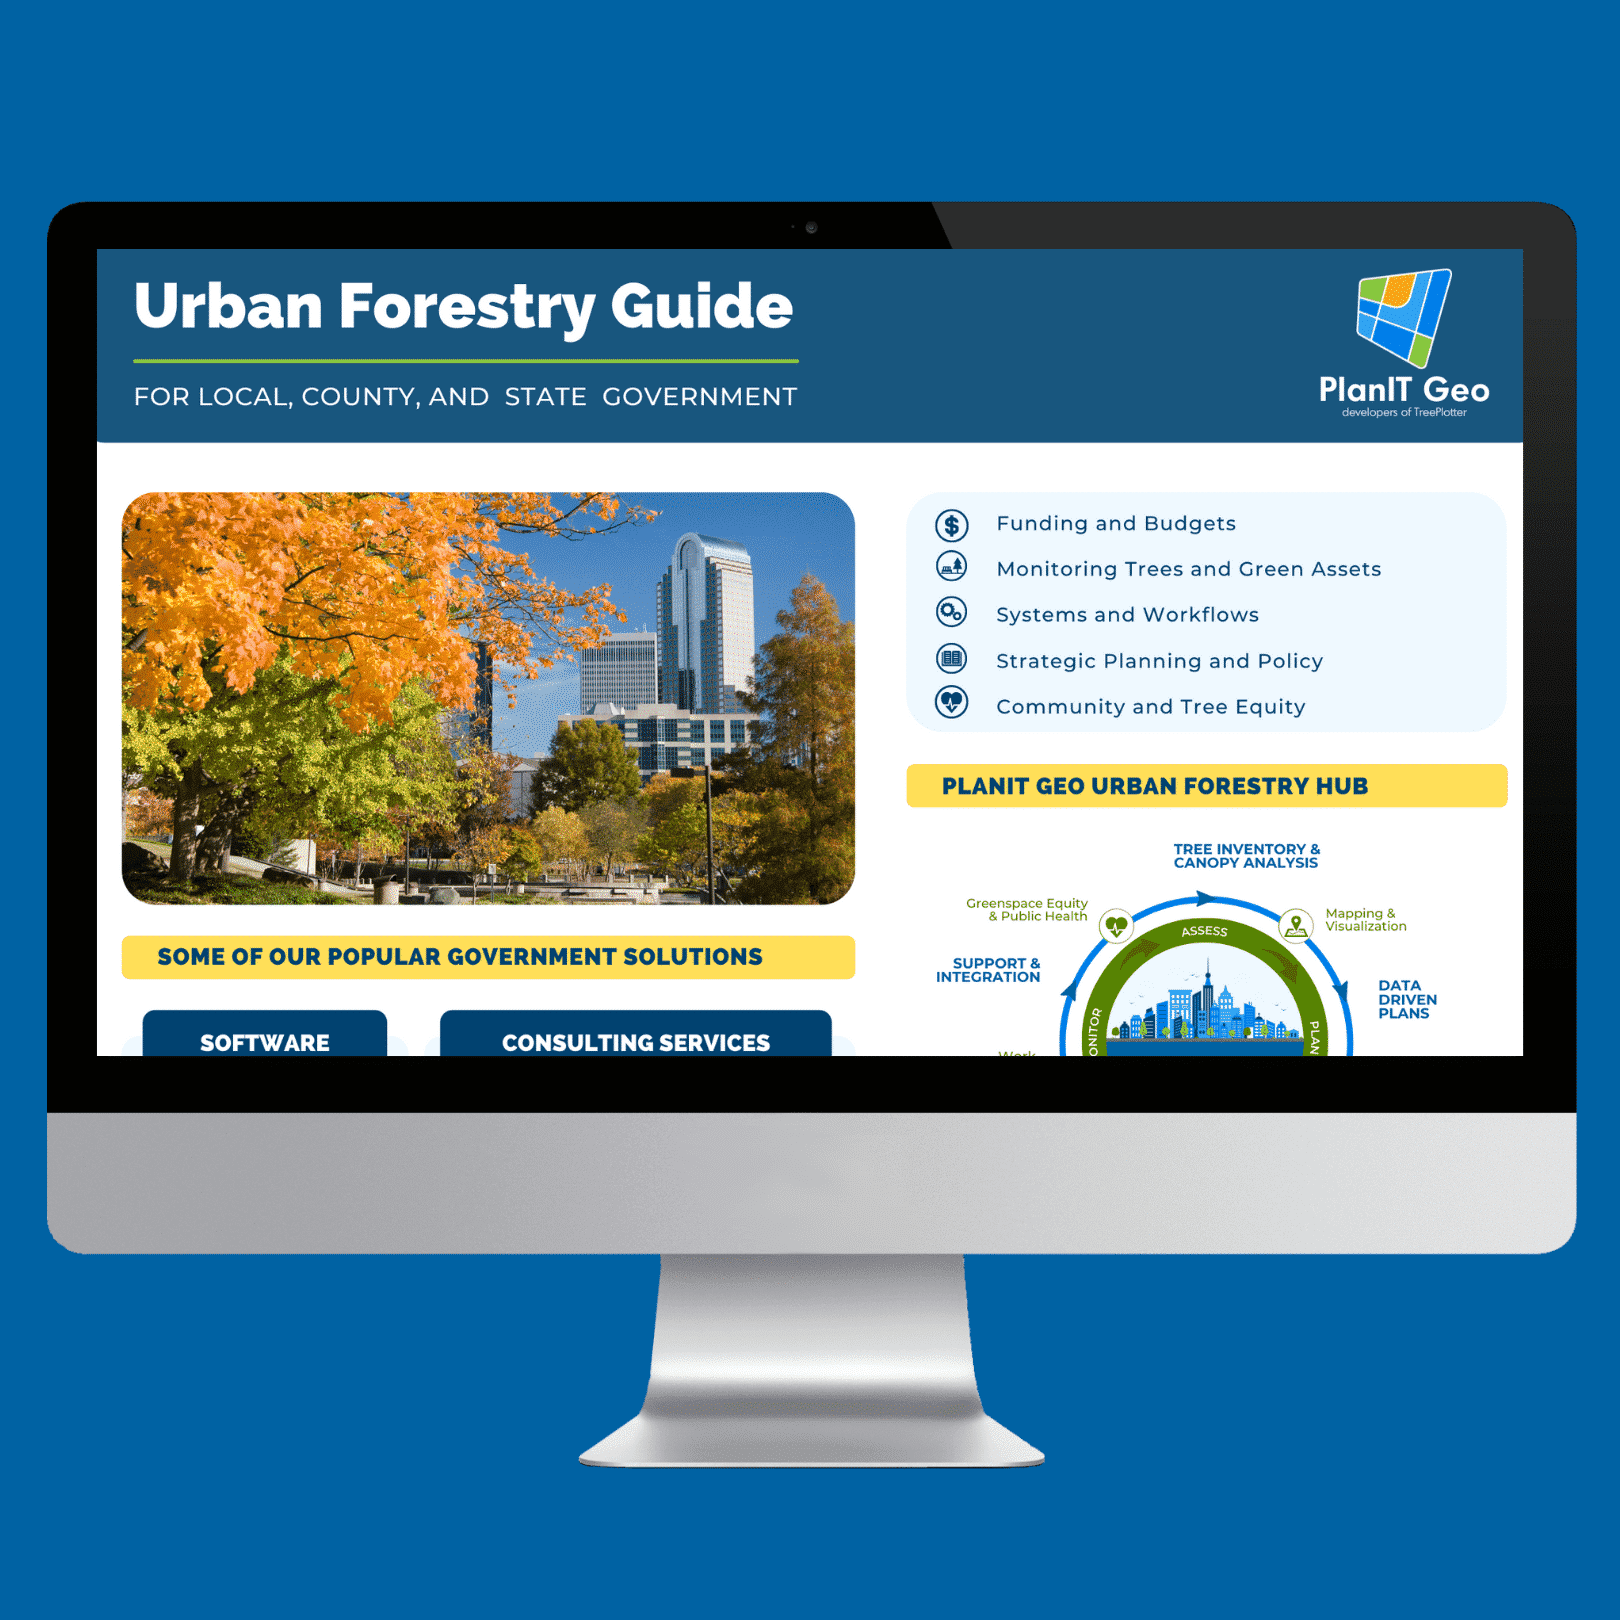 PlanIT Geo Urban Forestry Guide for Governments 1 page guide